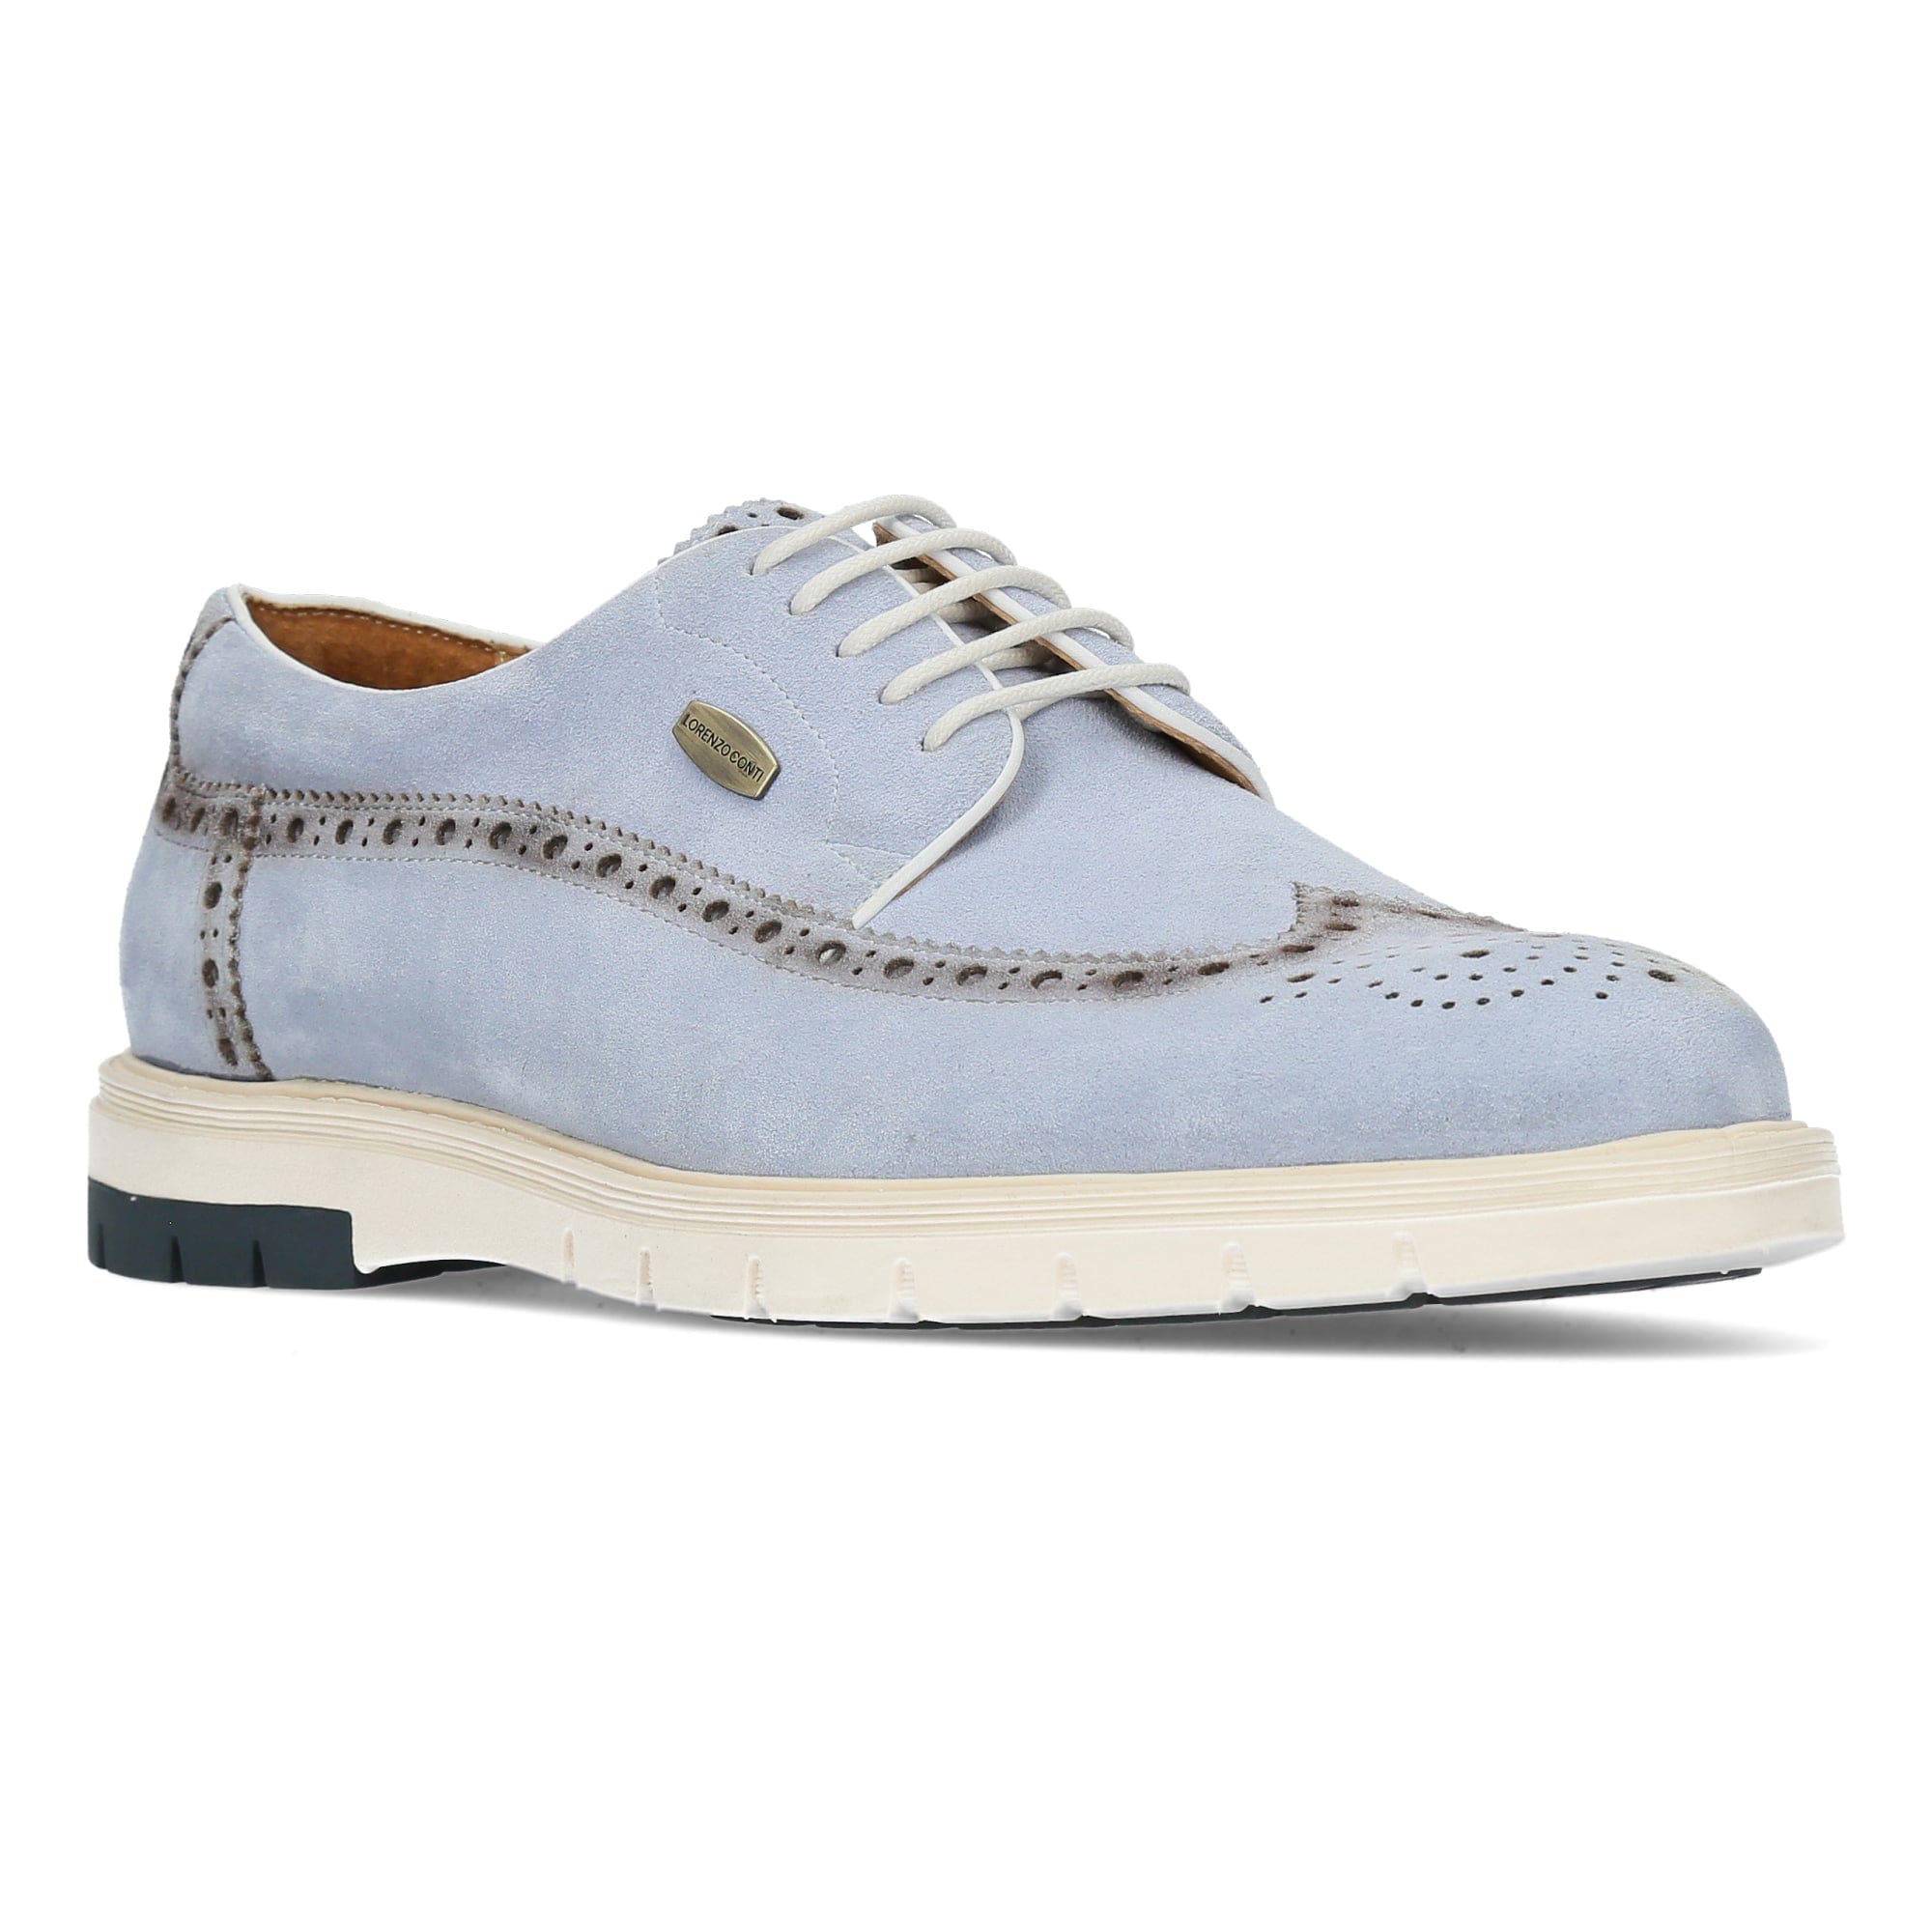 Chaussure Homme ARNO 01 - Soulier